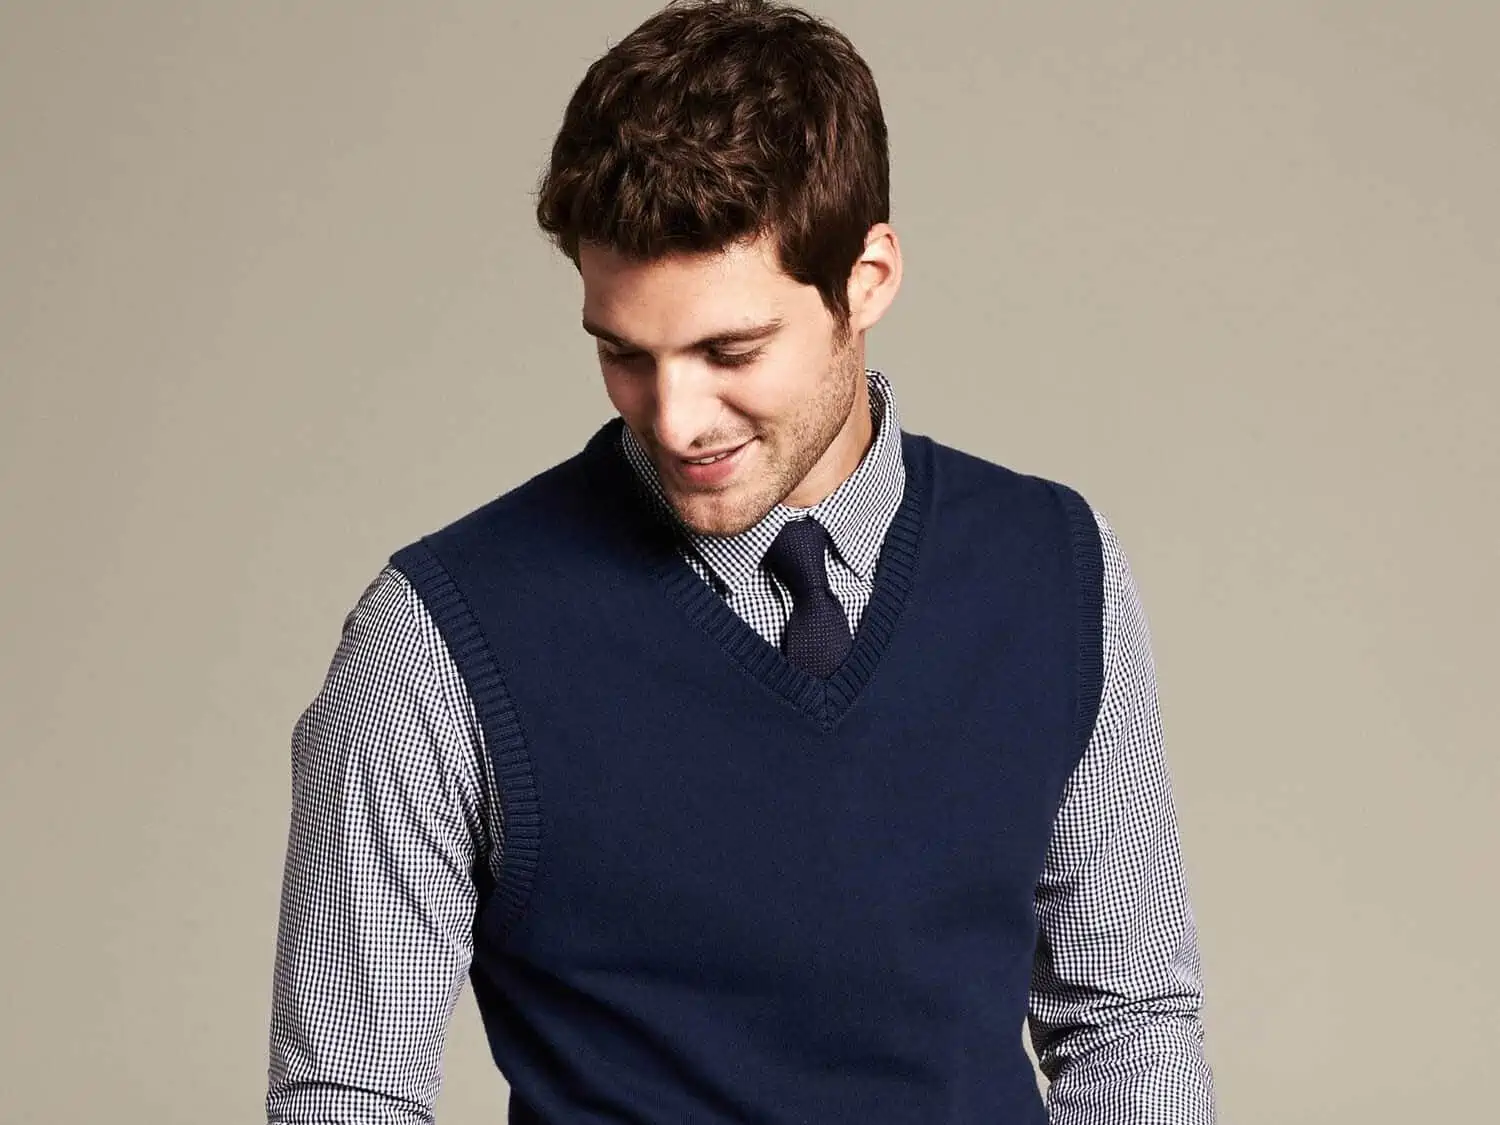 This sweater vest is perfect for layering or wearing under a blazer